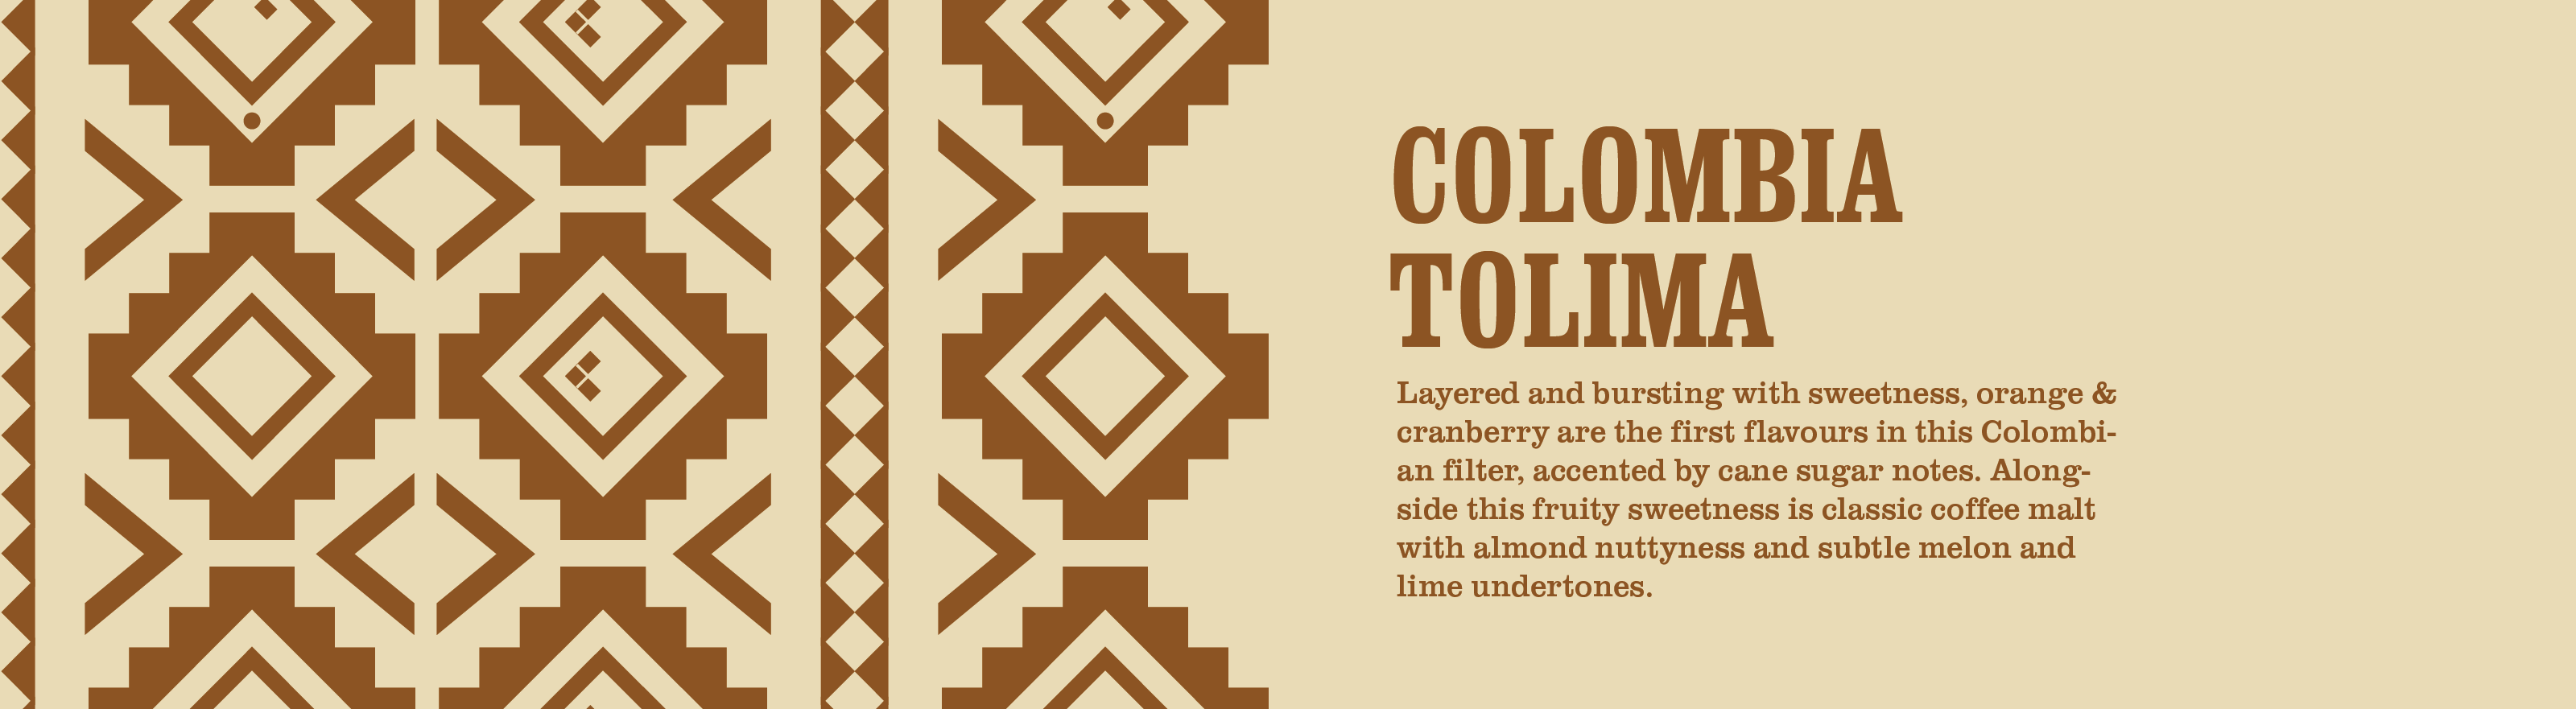 colombia tolima coffee informational image